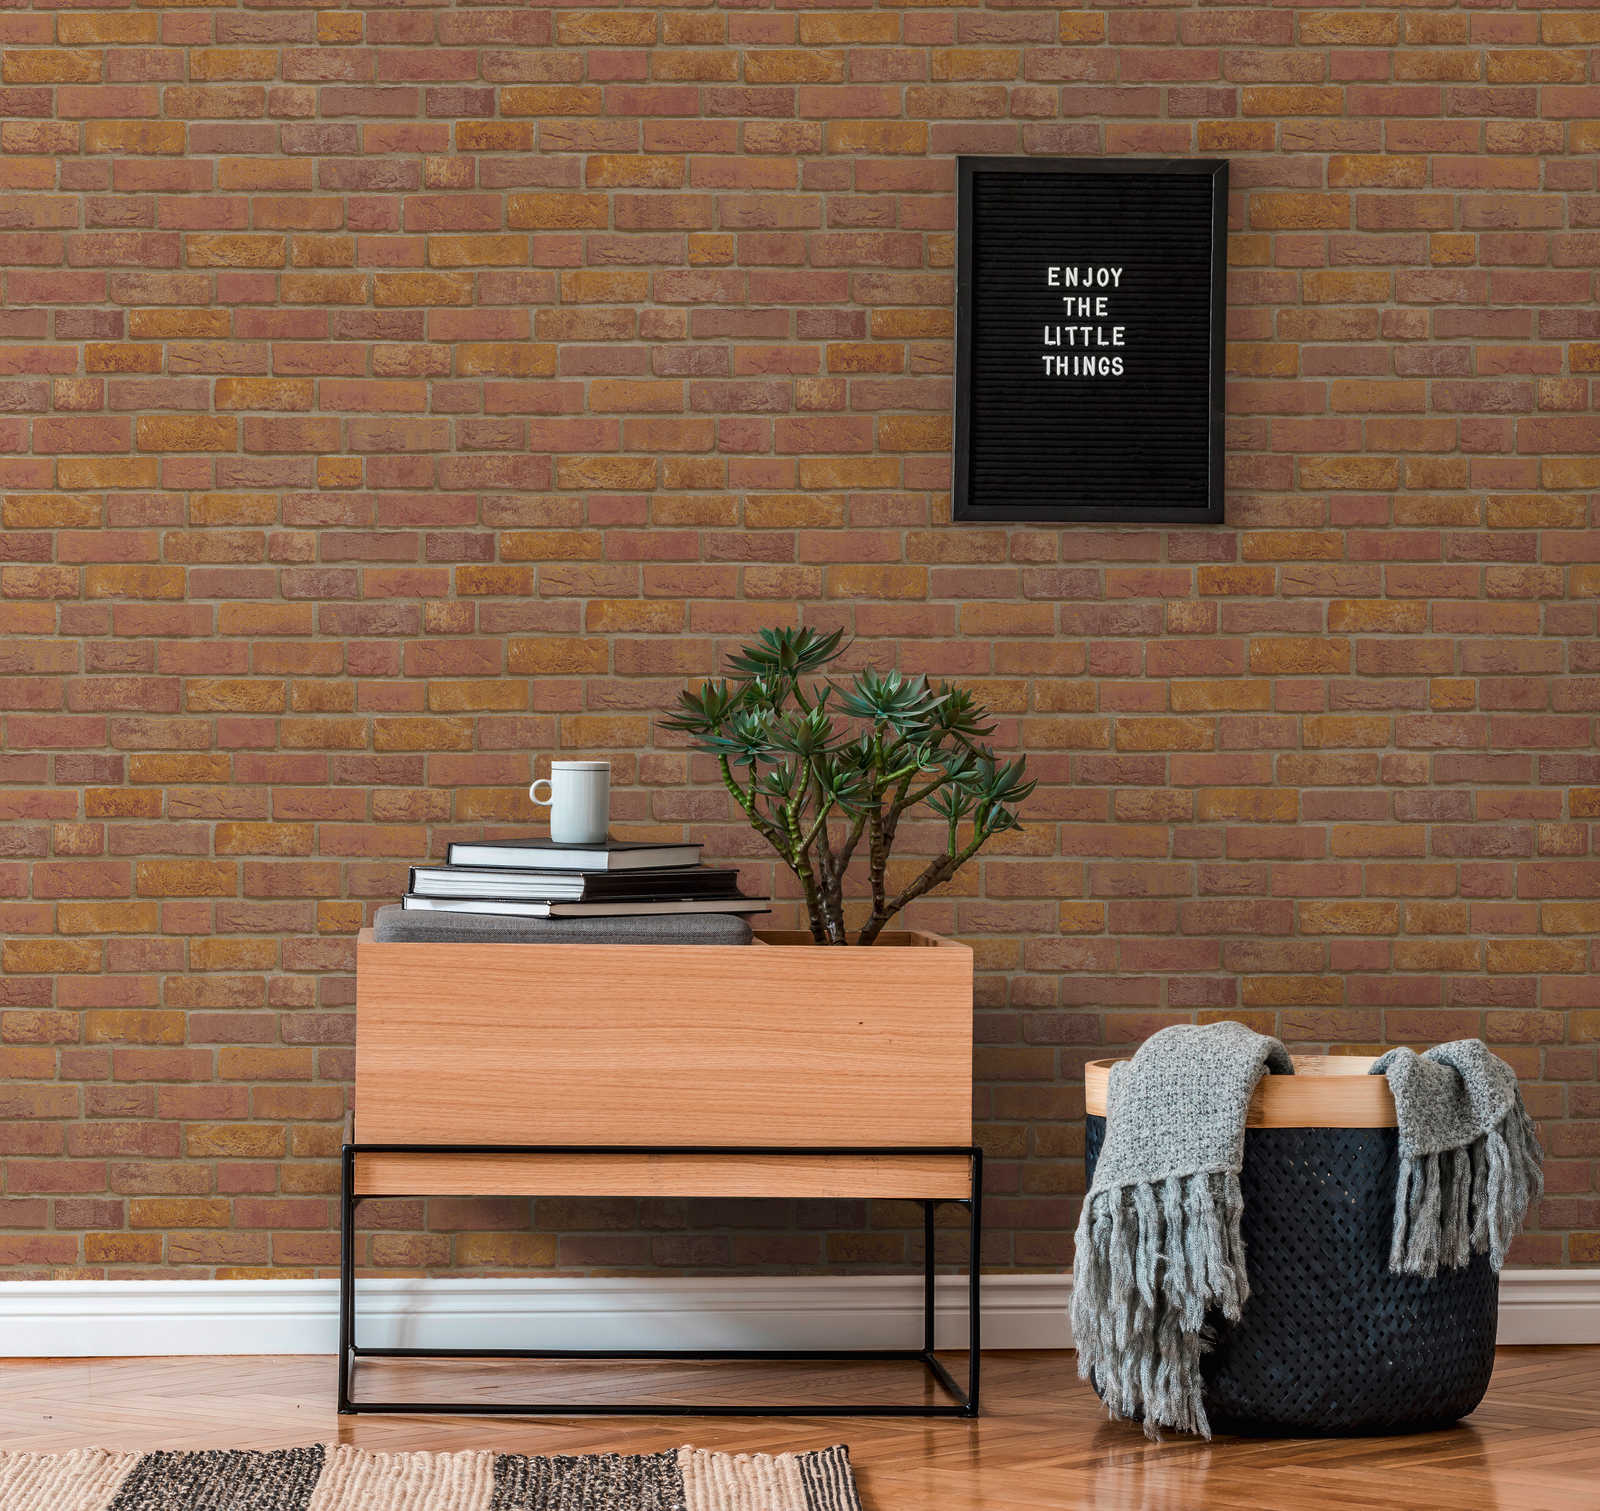             Brick wallpaper with 3D masonry look - red, brown
        